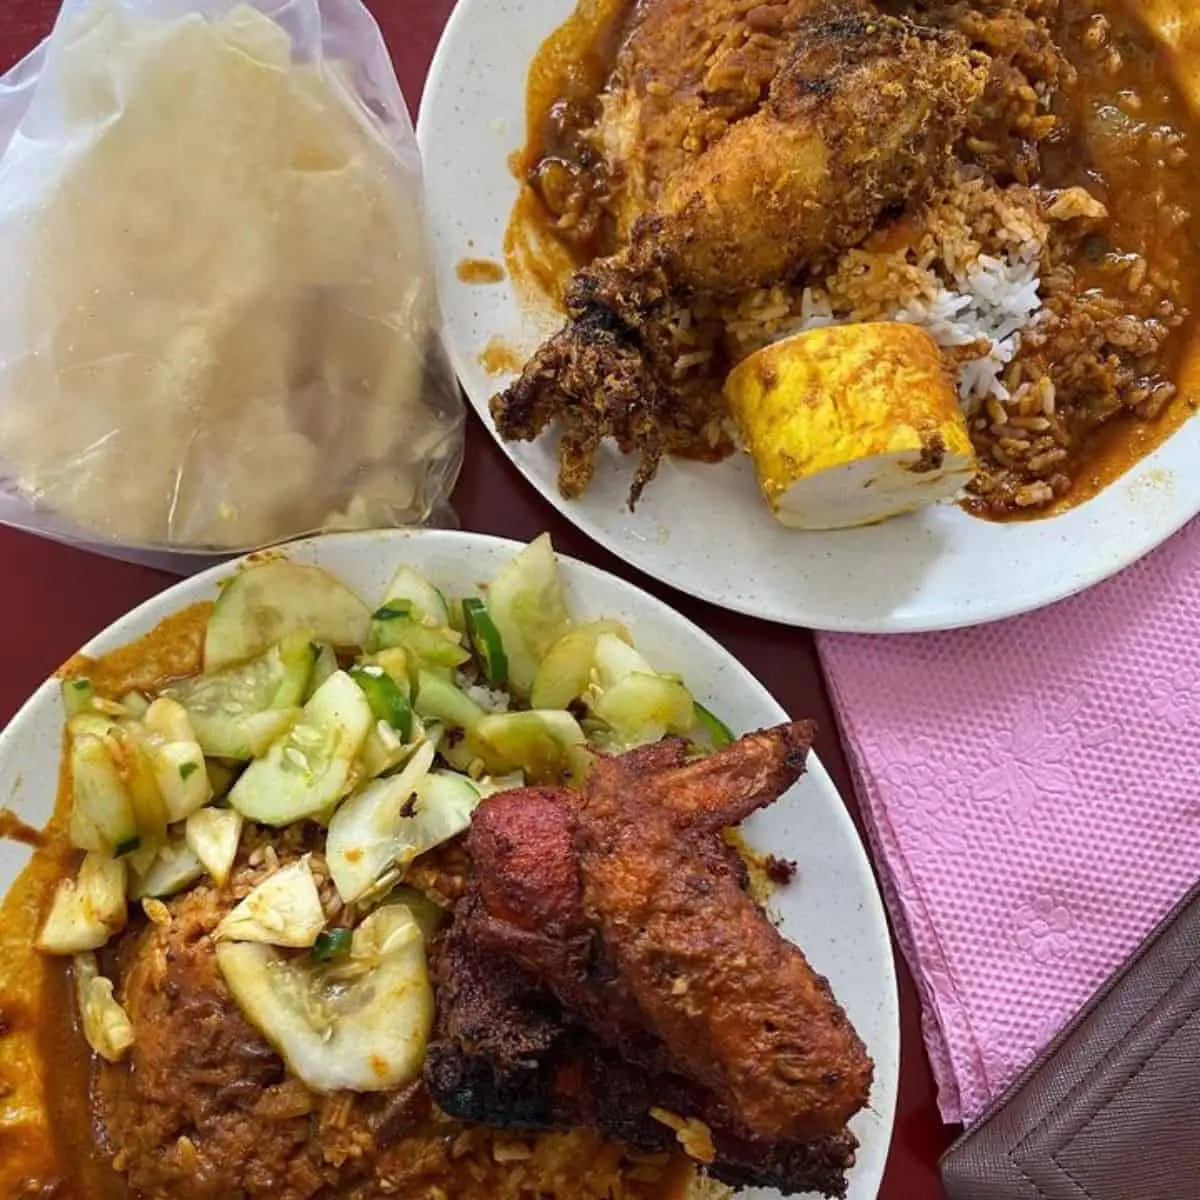 Full plate of Nasi Kandar from Deen Maju with a piece of chicken, sliced salted egg, and green veggie